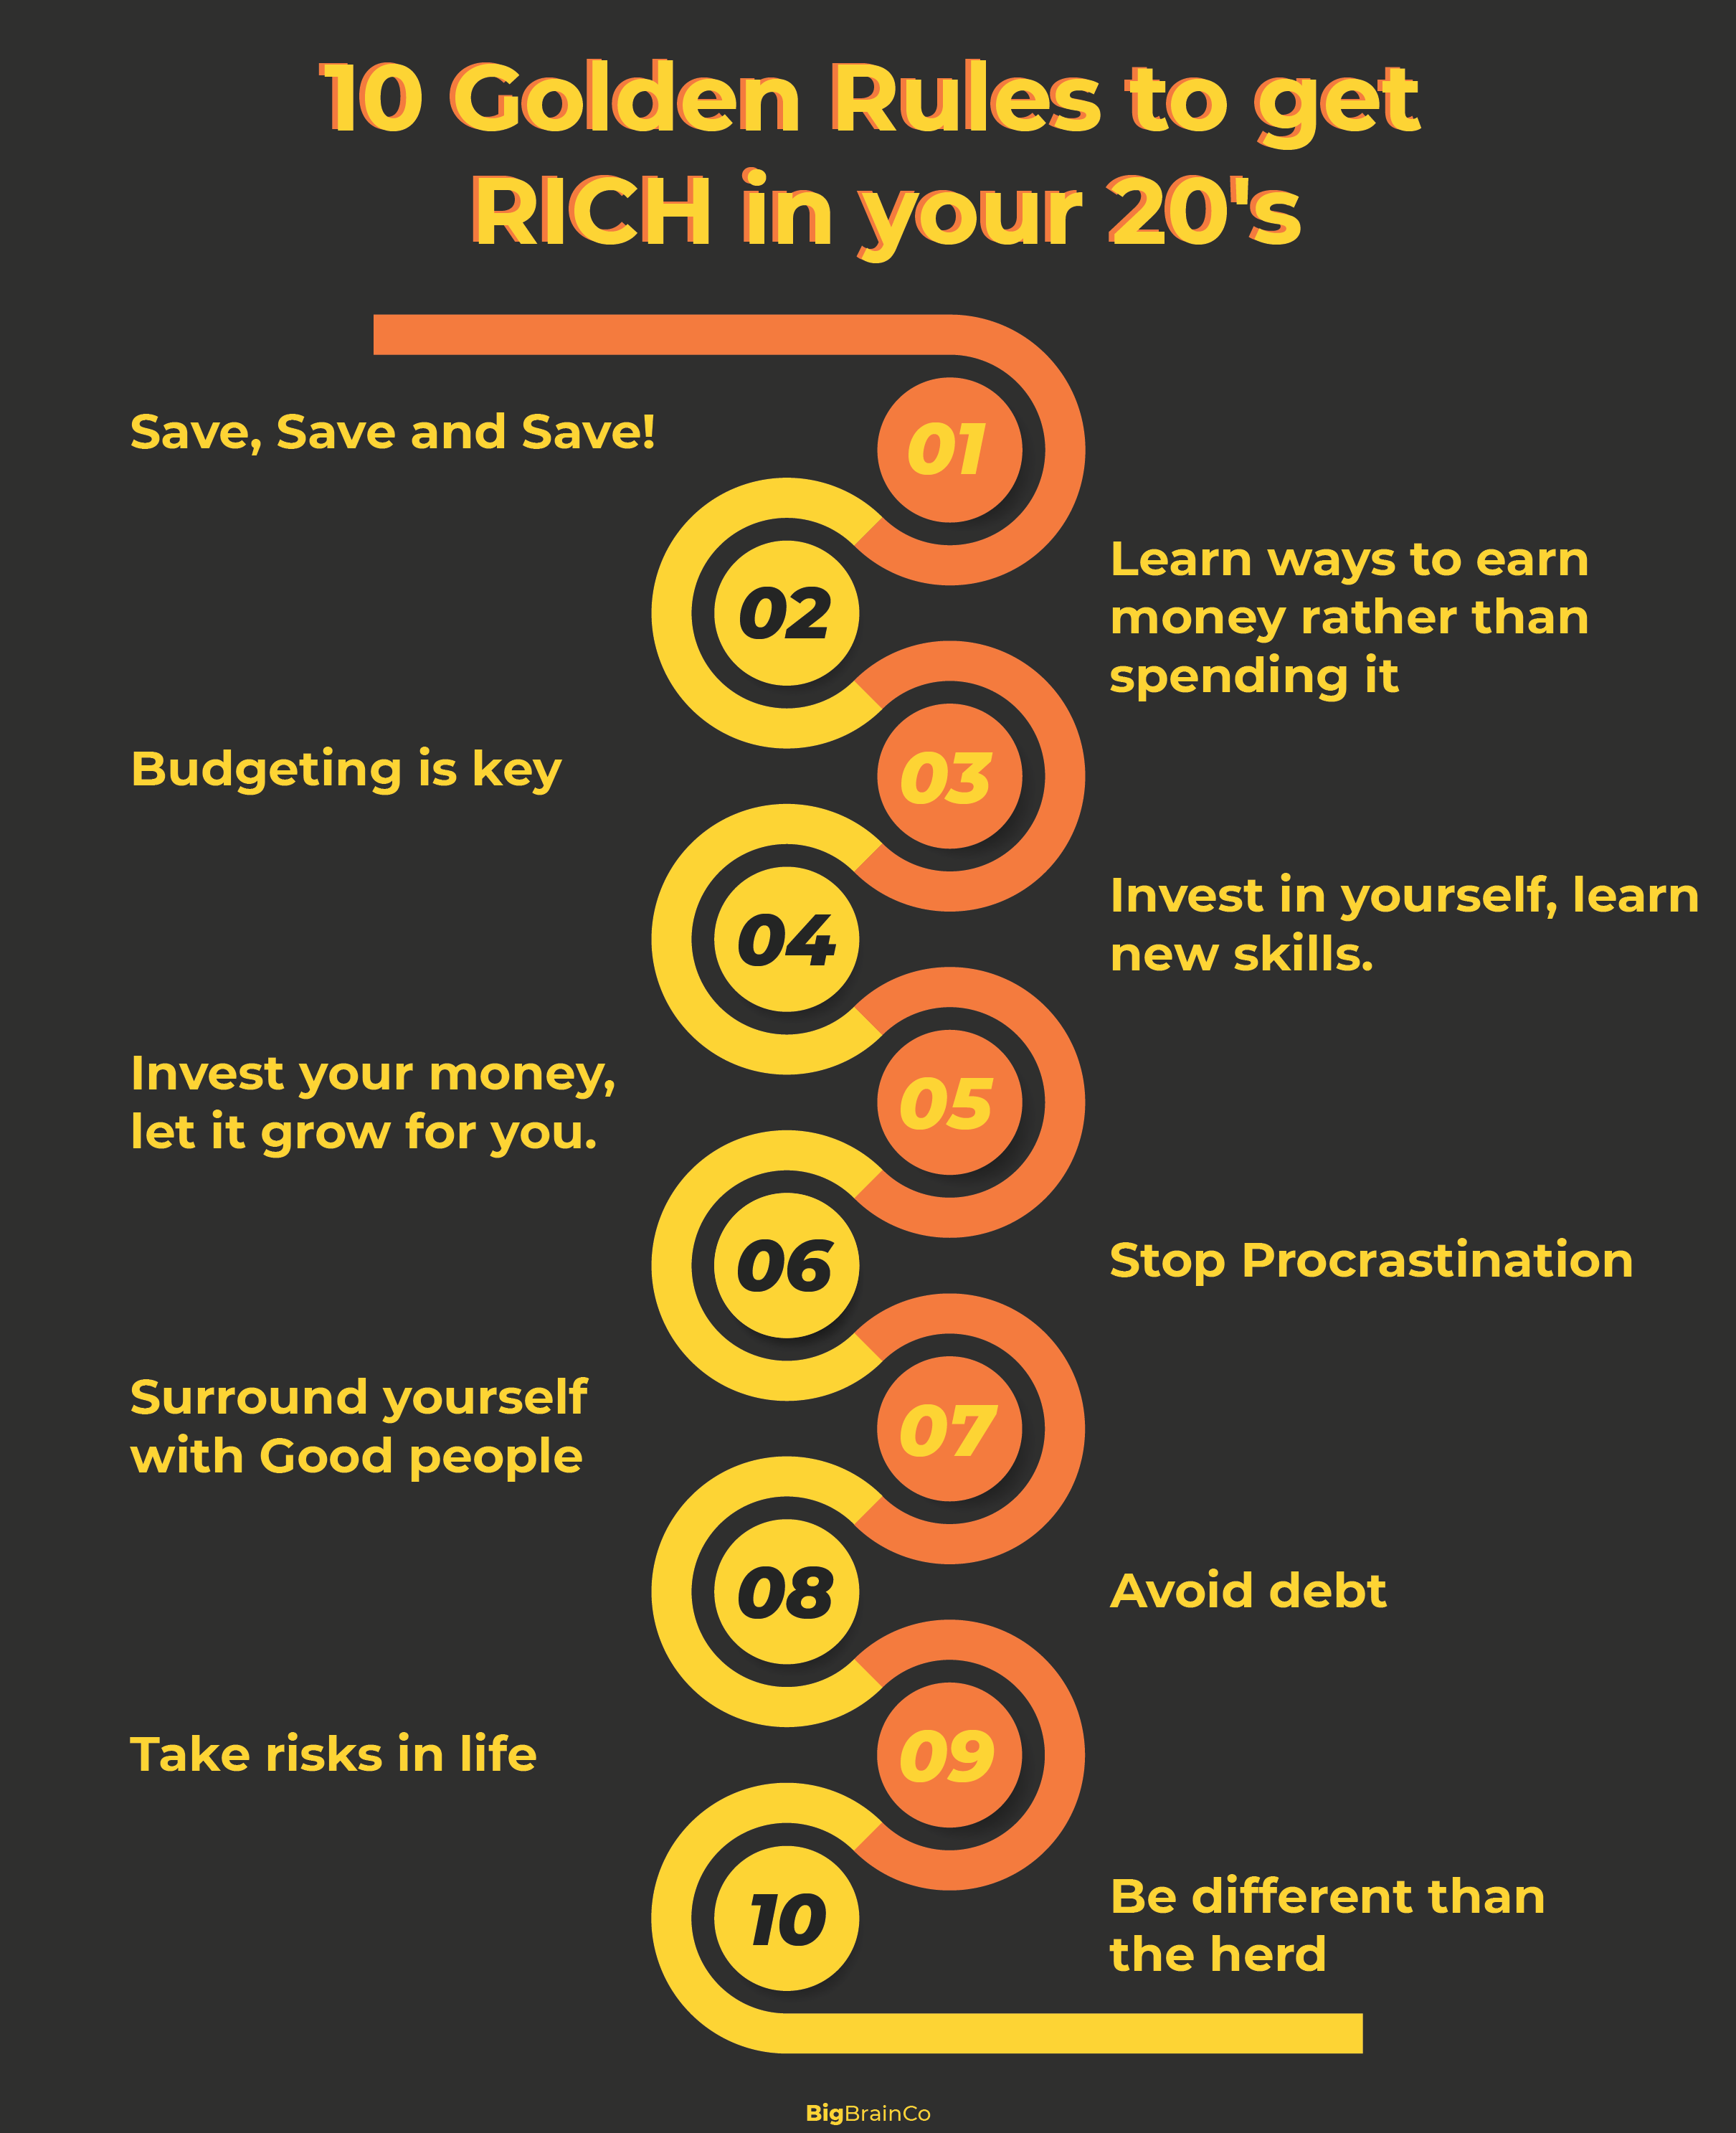 How to Get rich in your 20s